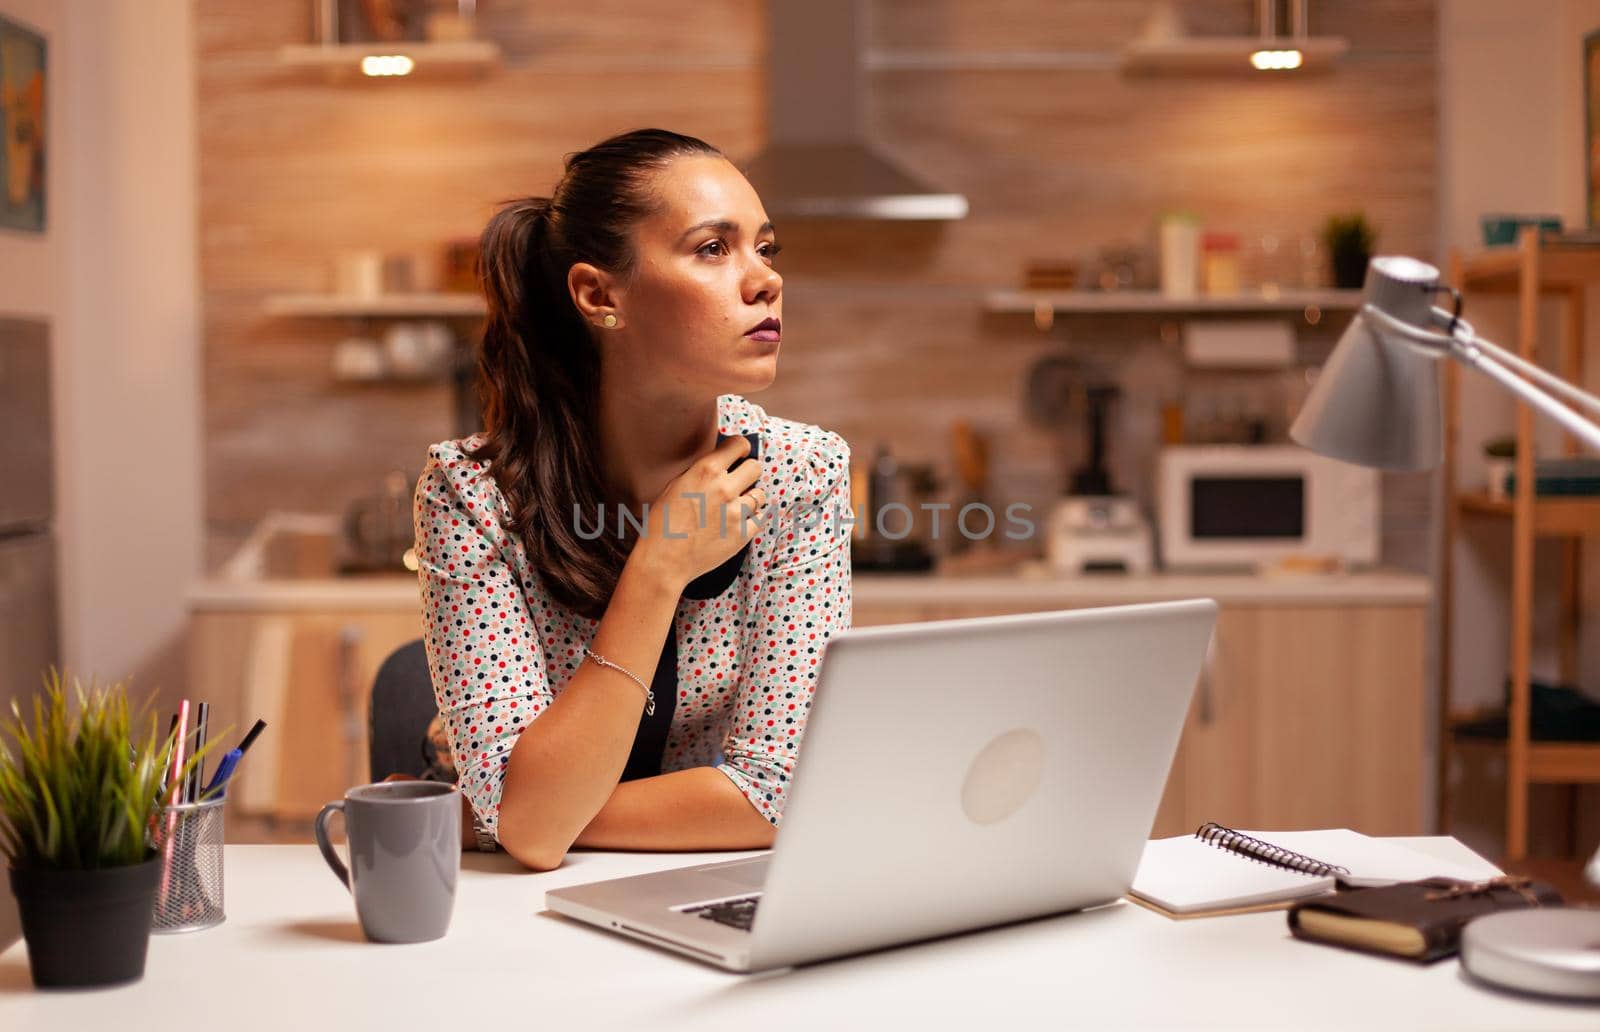 Woman thinking about her career while working on a deadline late at night in home kitchen. Employee using modern technology at midnight doing overtime for job, business, busy, career, network, lifestyle ,wireless.